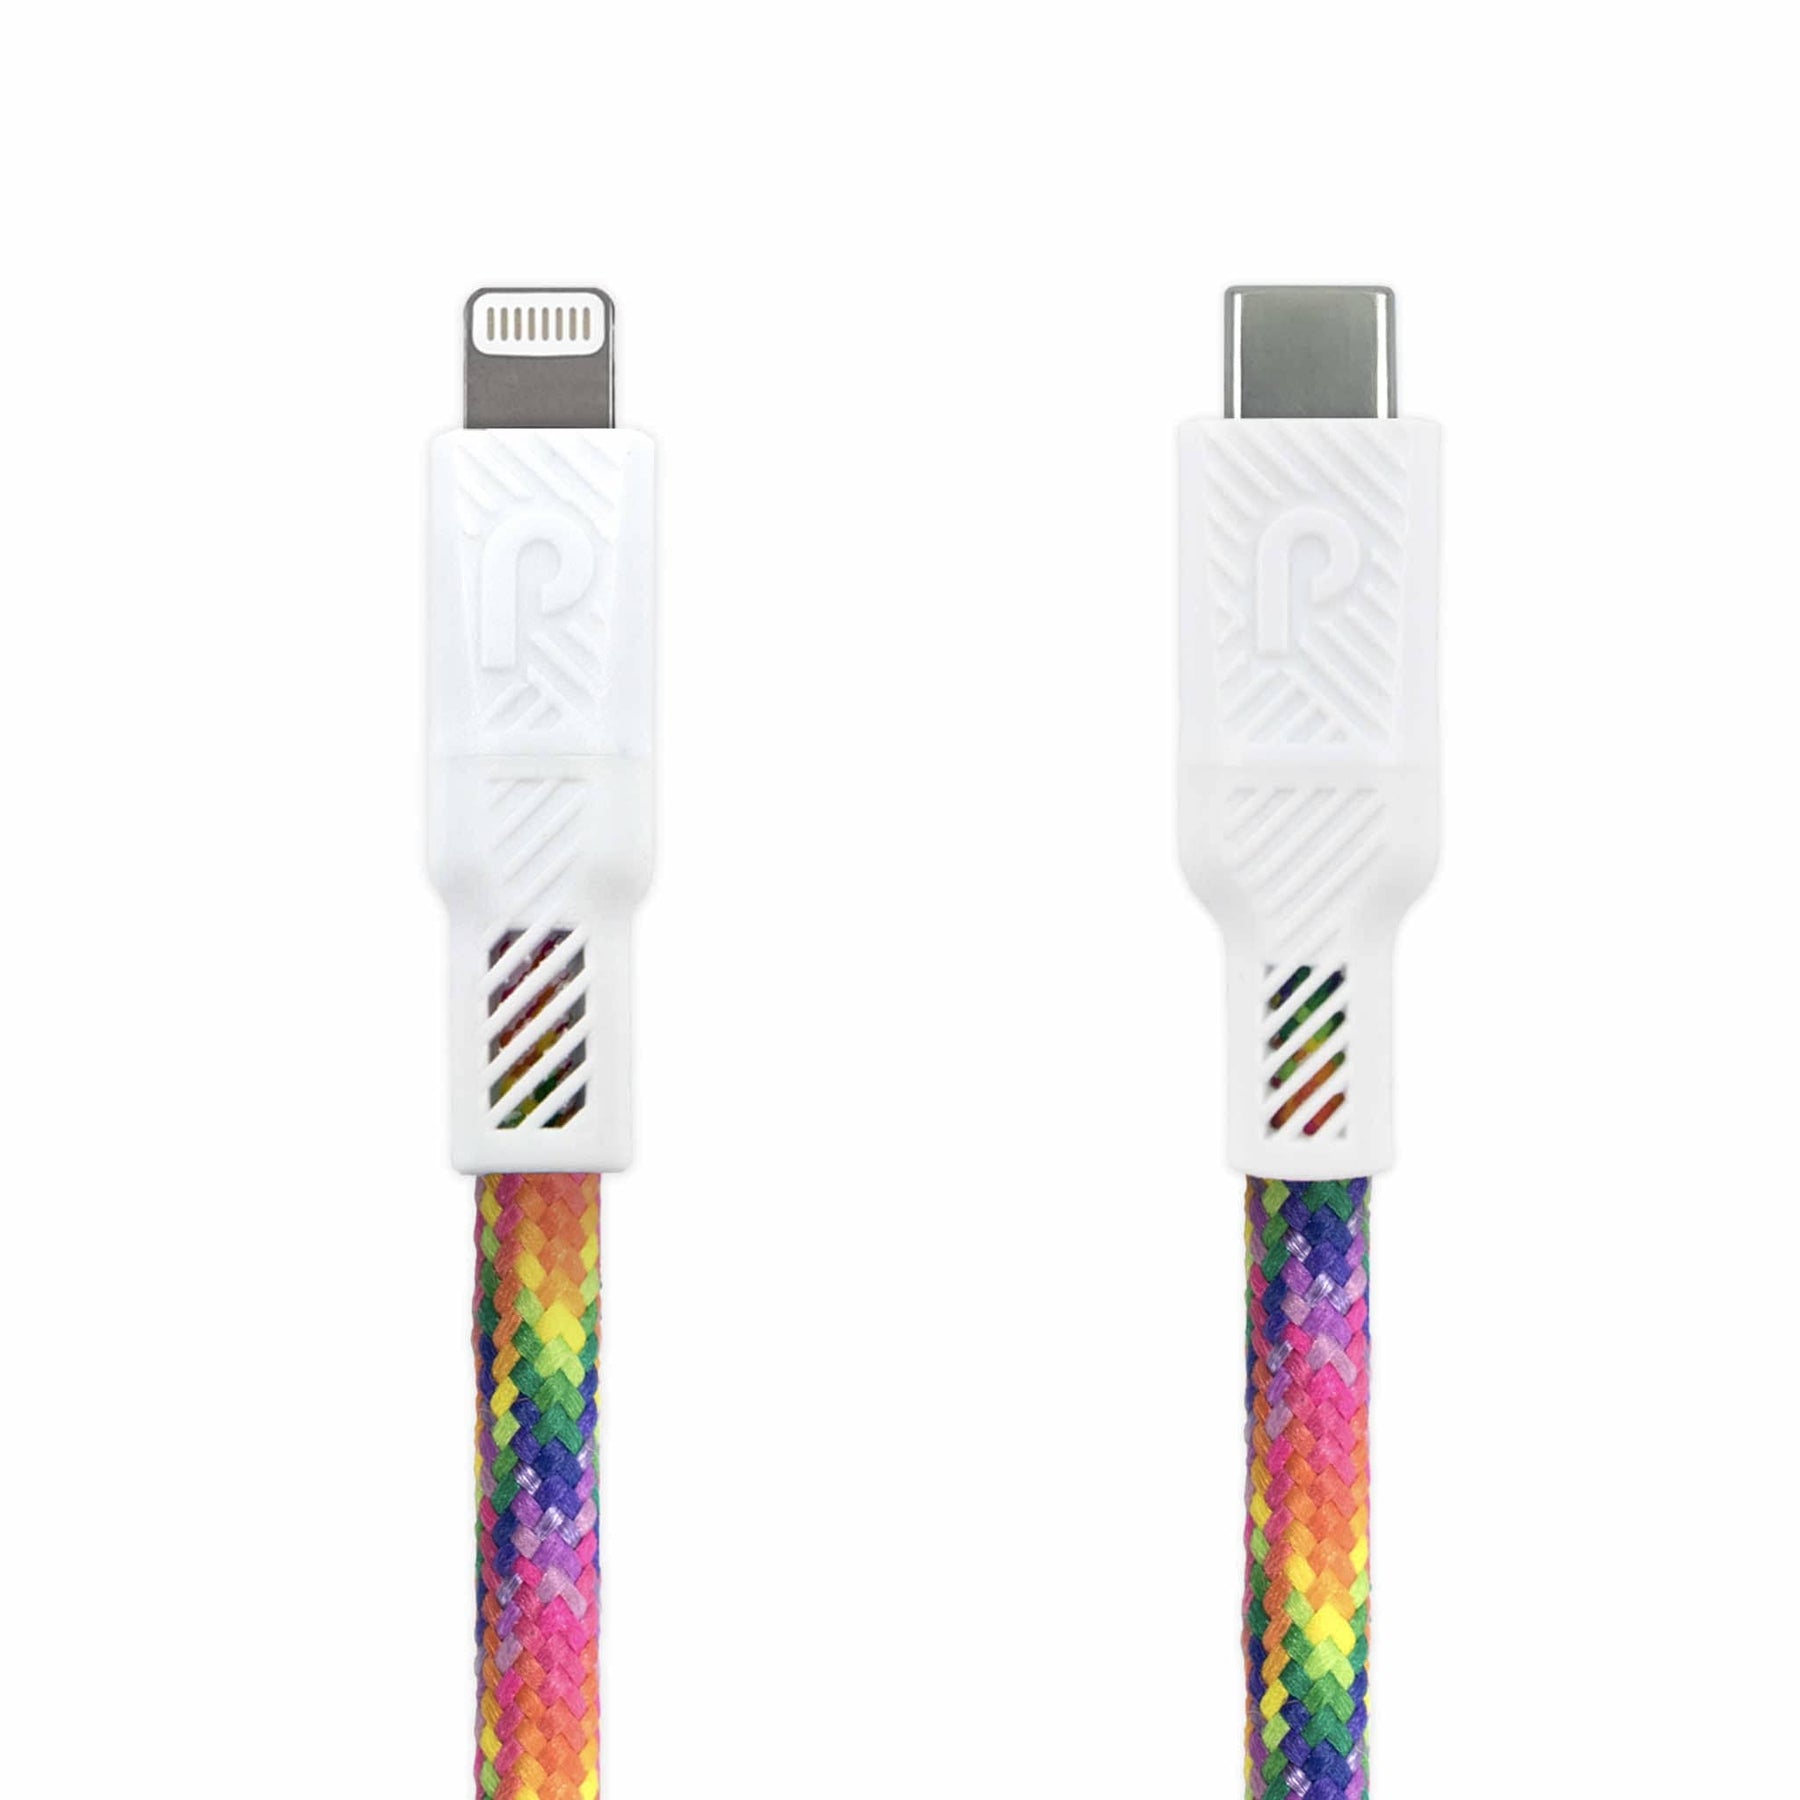 InstantConnect USB-C to Lightning  20W PD fast charging cable for iPhone®  and iPad®